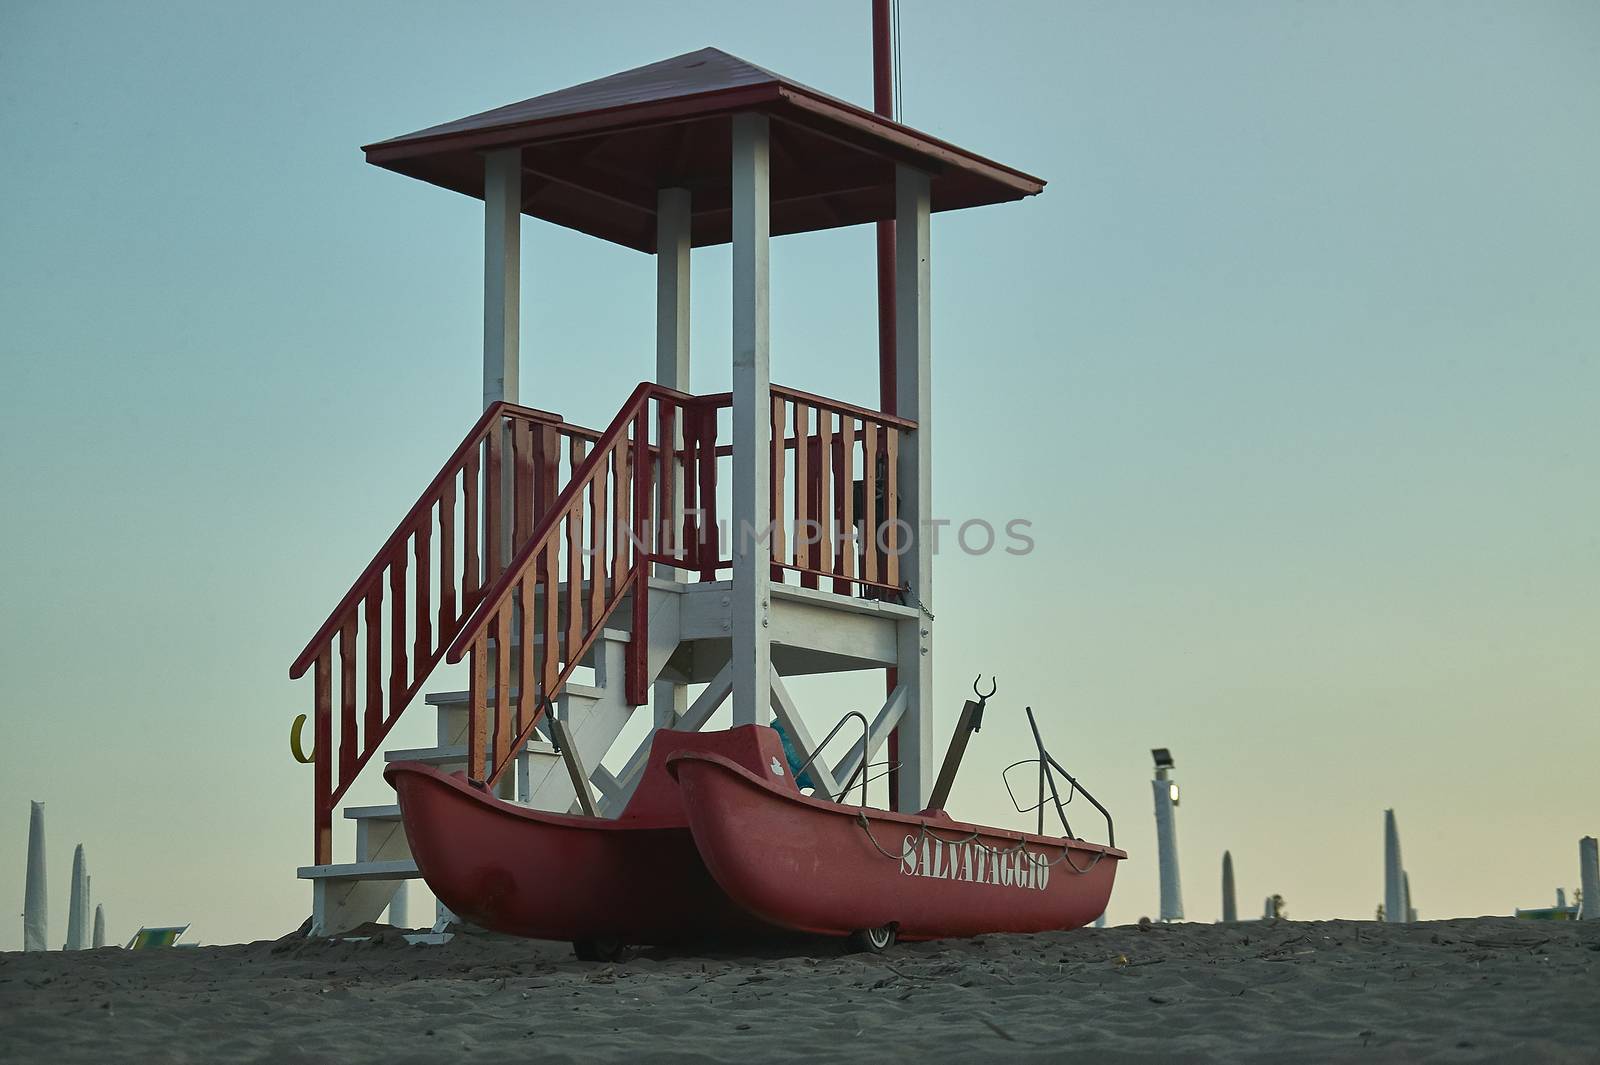 Rescue station for the beach by pippocarlot